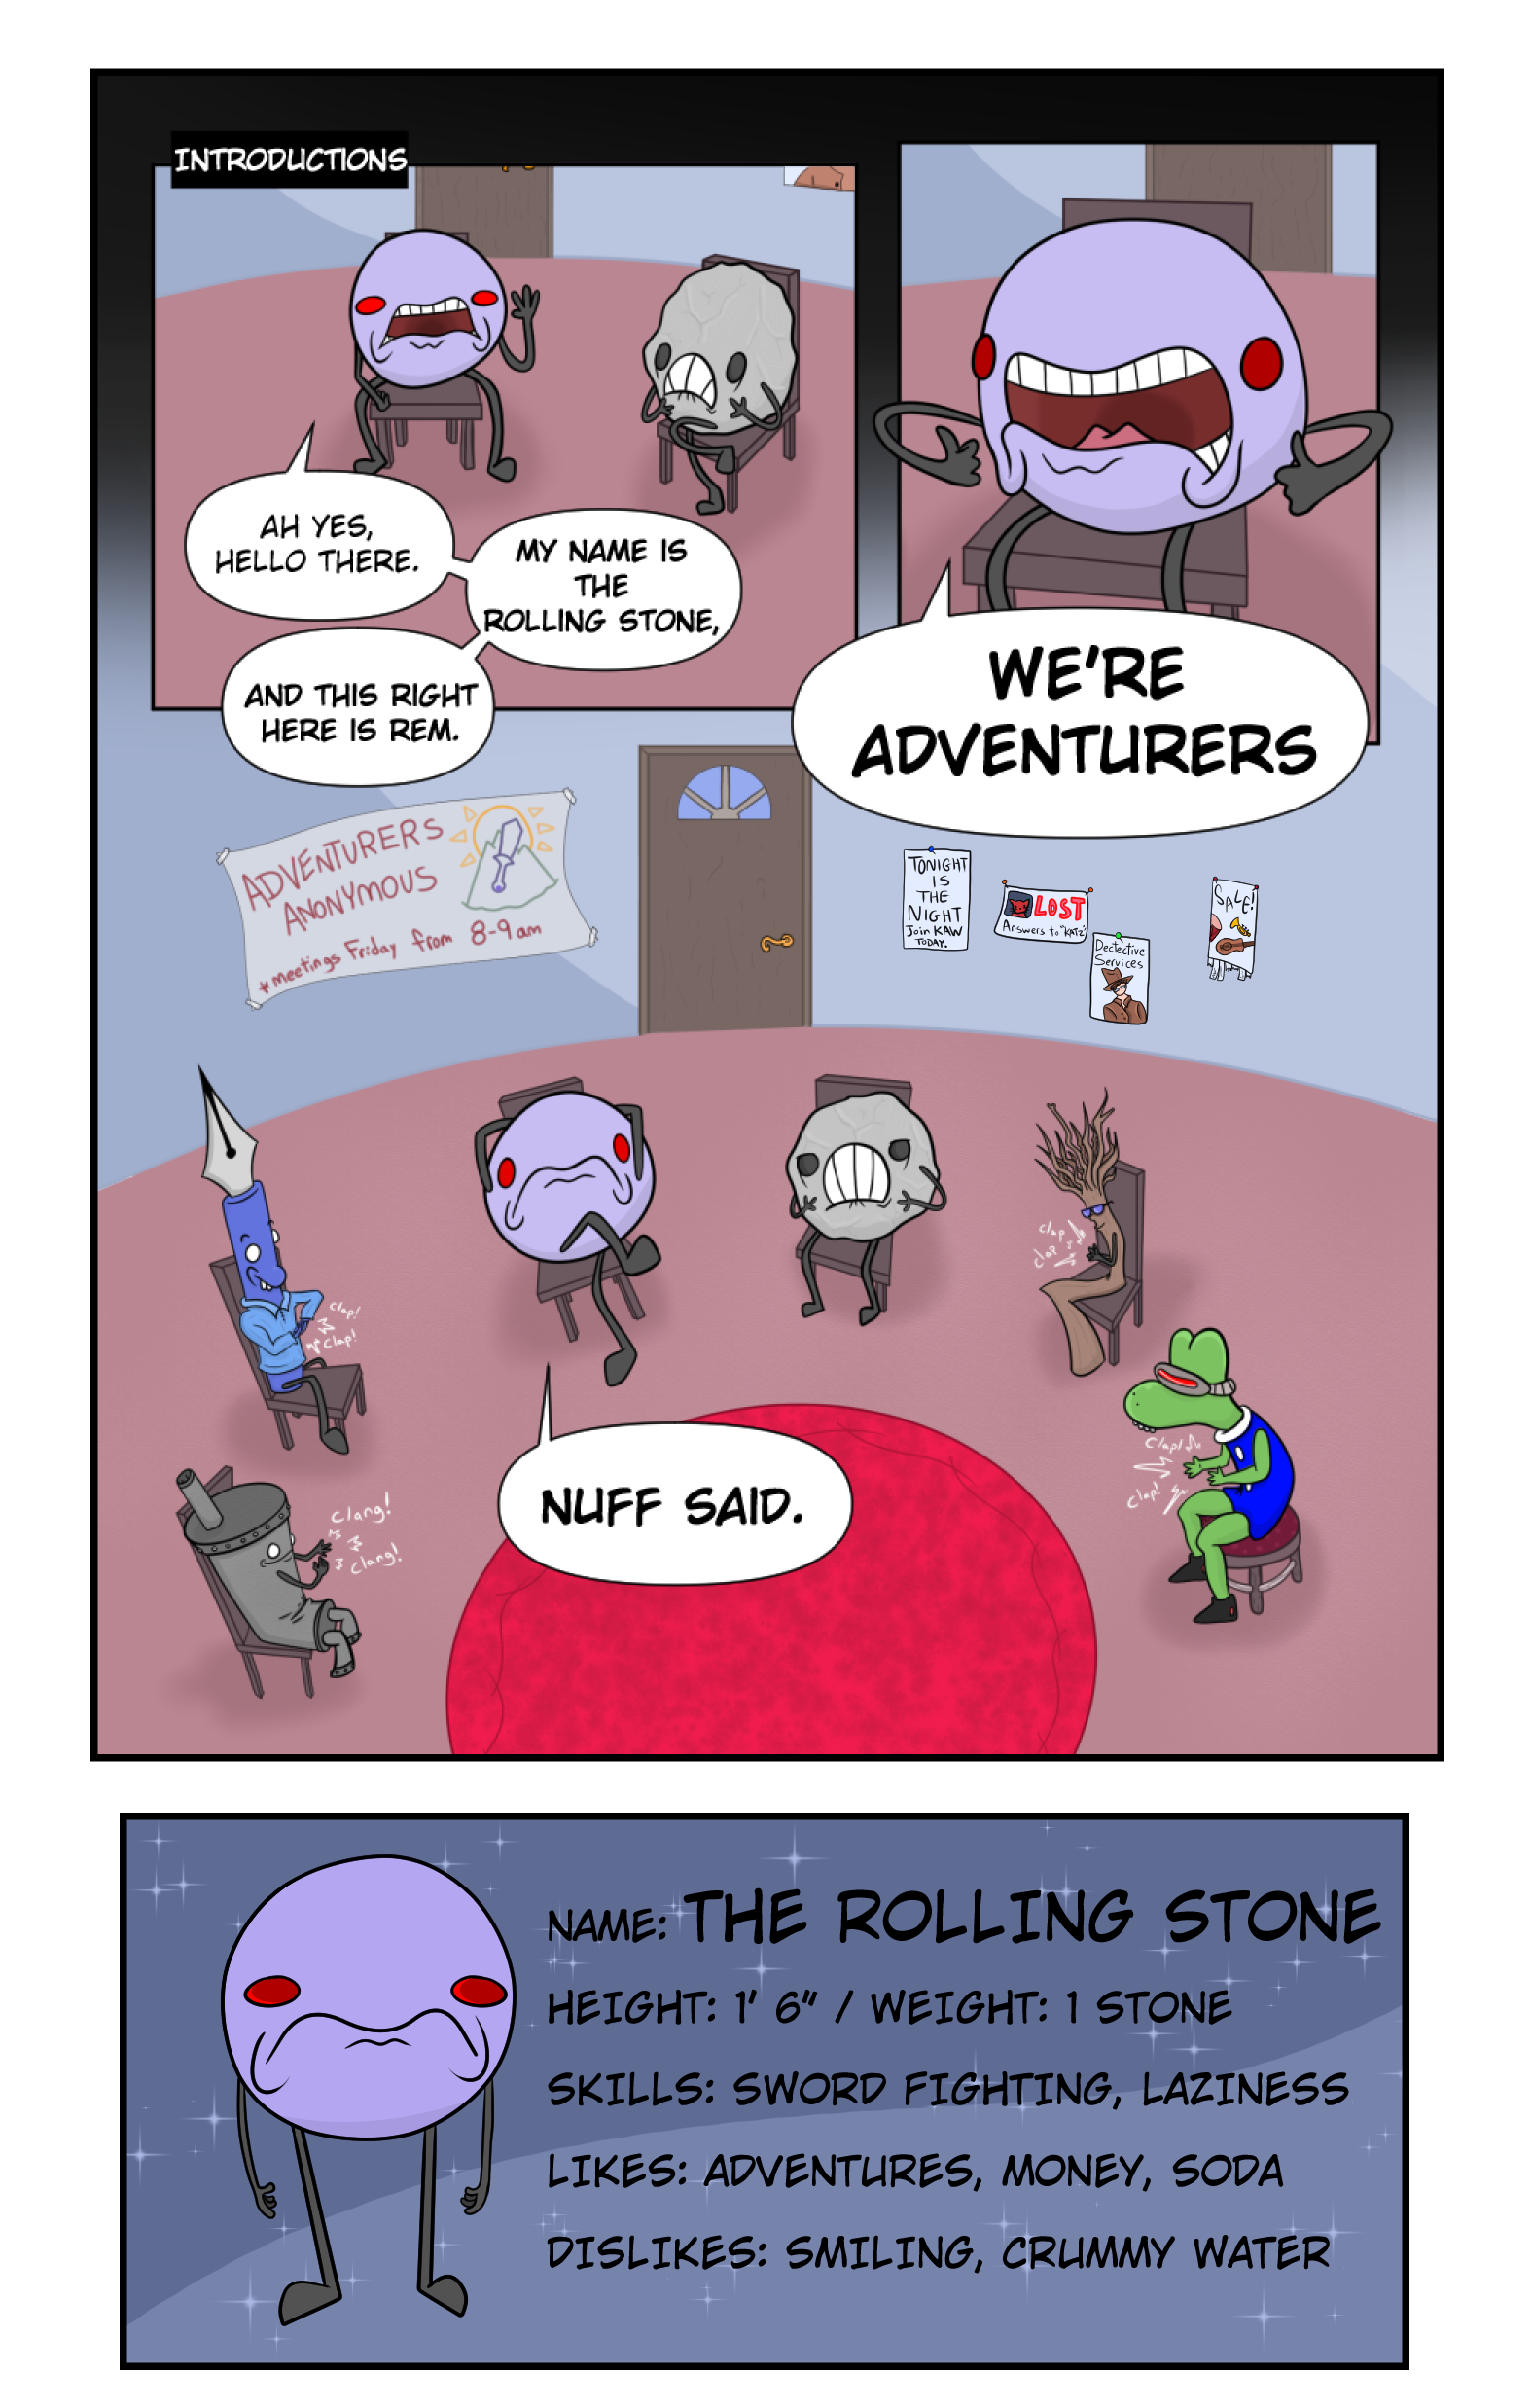 Two rocks at an AA meeting (Adventurers Anonymous